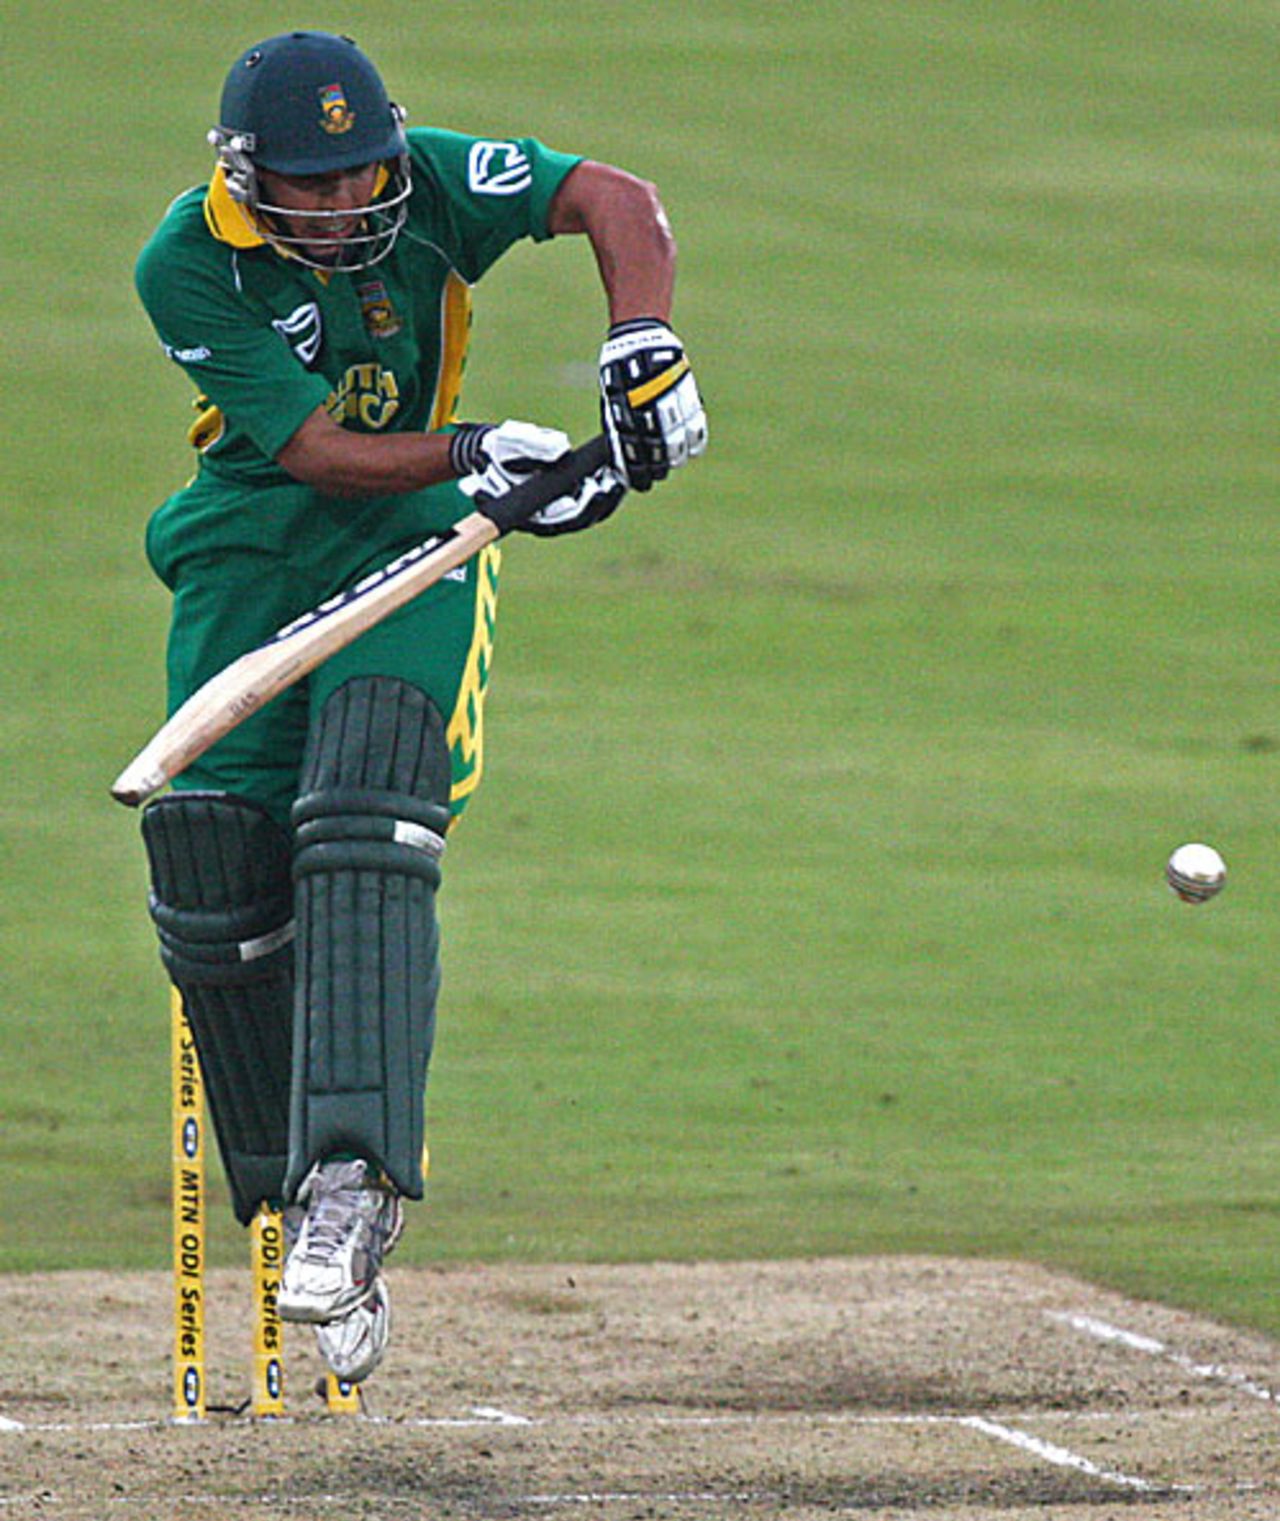 Justin Ontong jumps back and nudges to leg, South Africa v West Indies, 1st ODI, Centurion, January 20, 2008